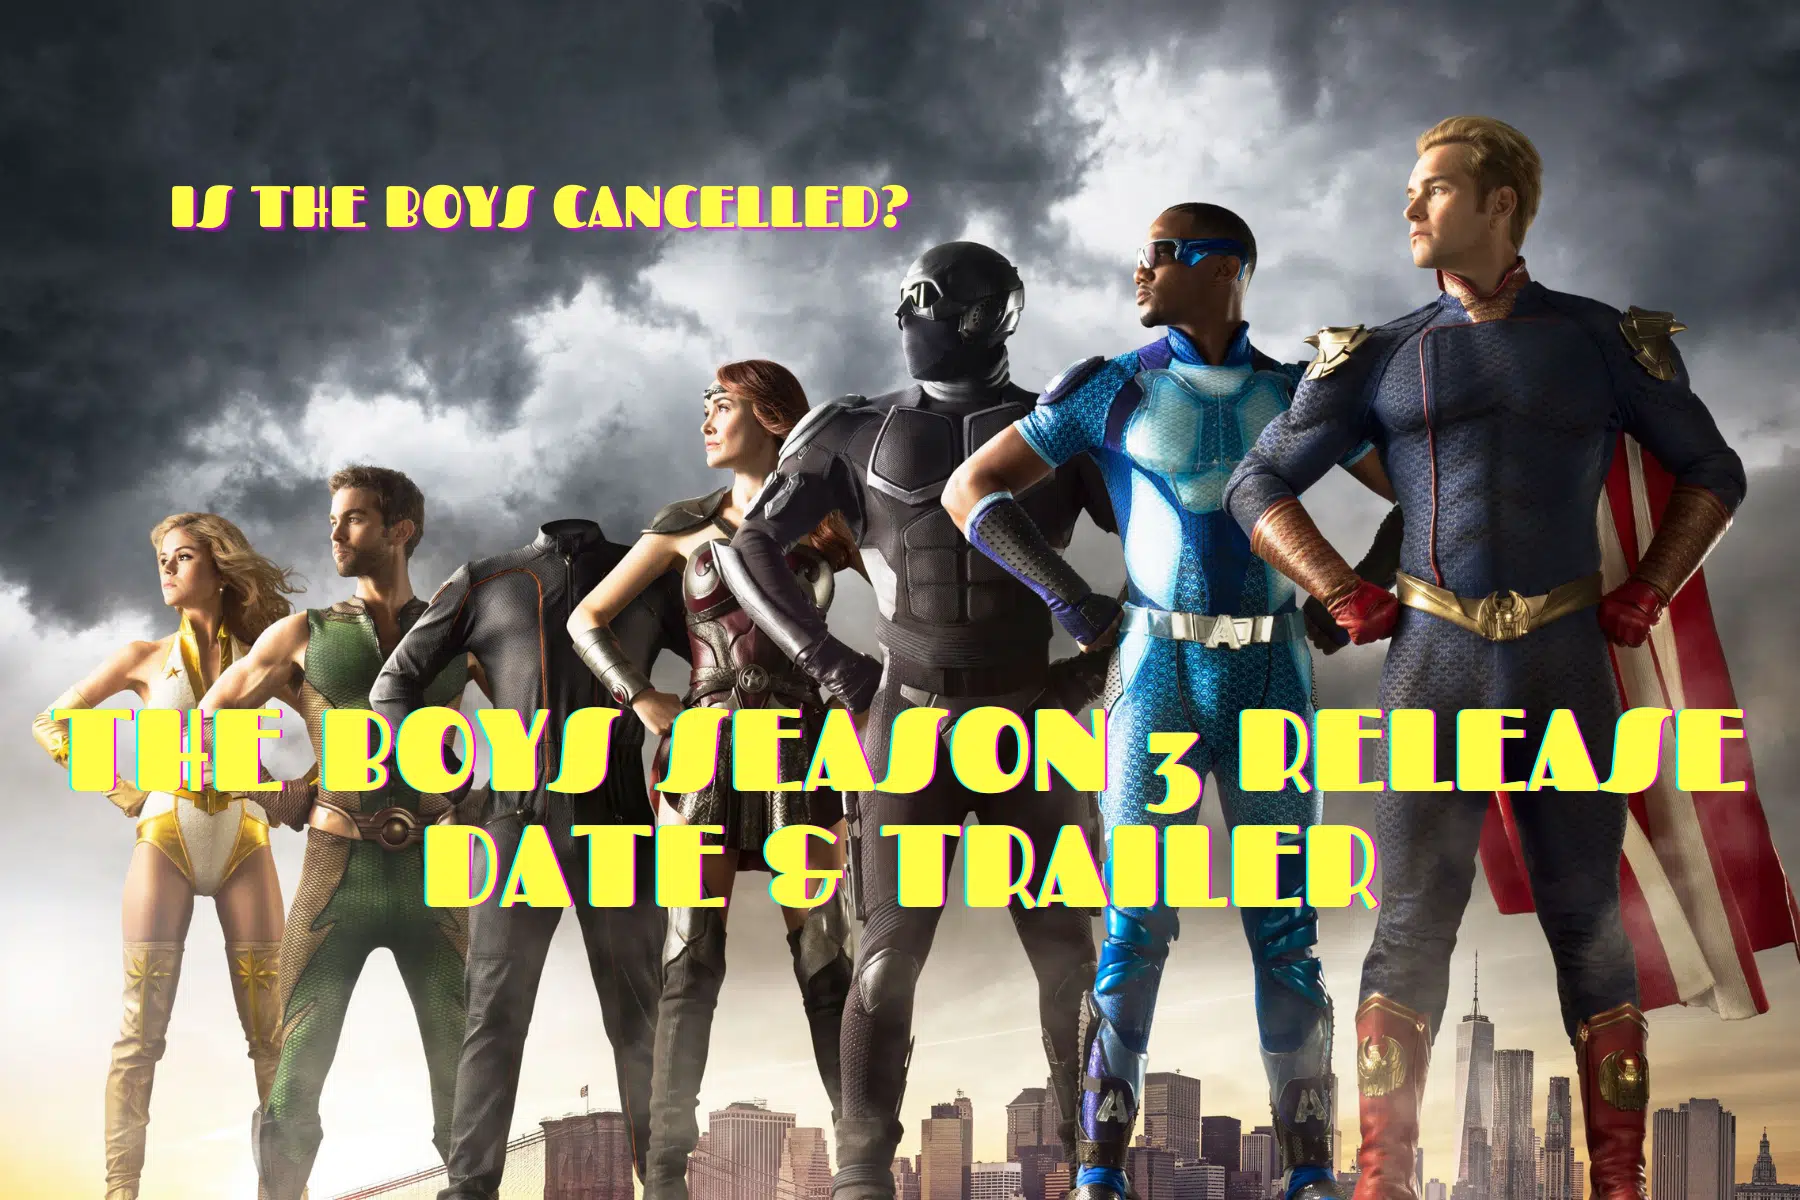 The Boys Season 3 Release Date, Trailer - Is The Boys Cancelled?